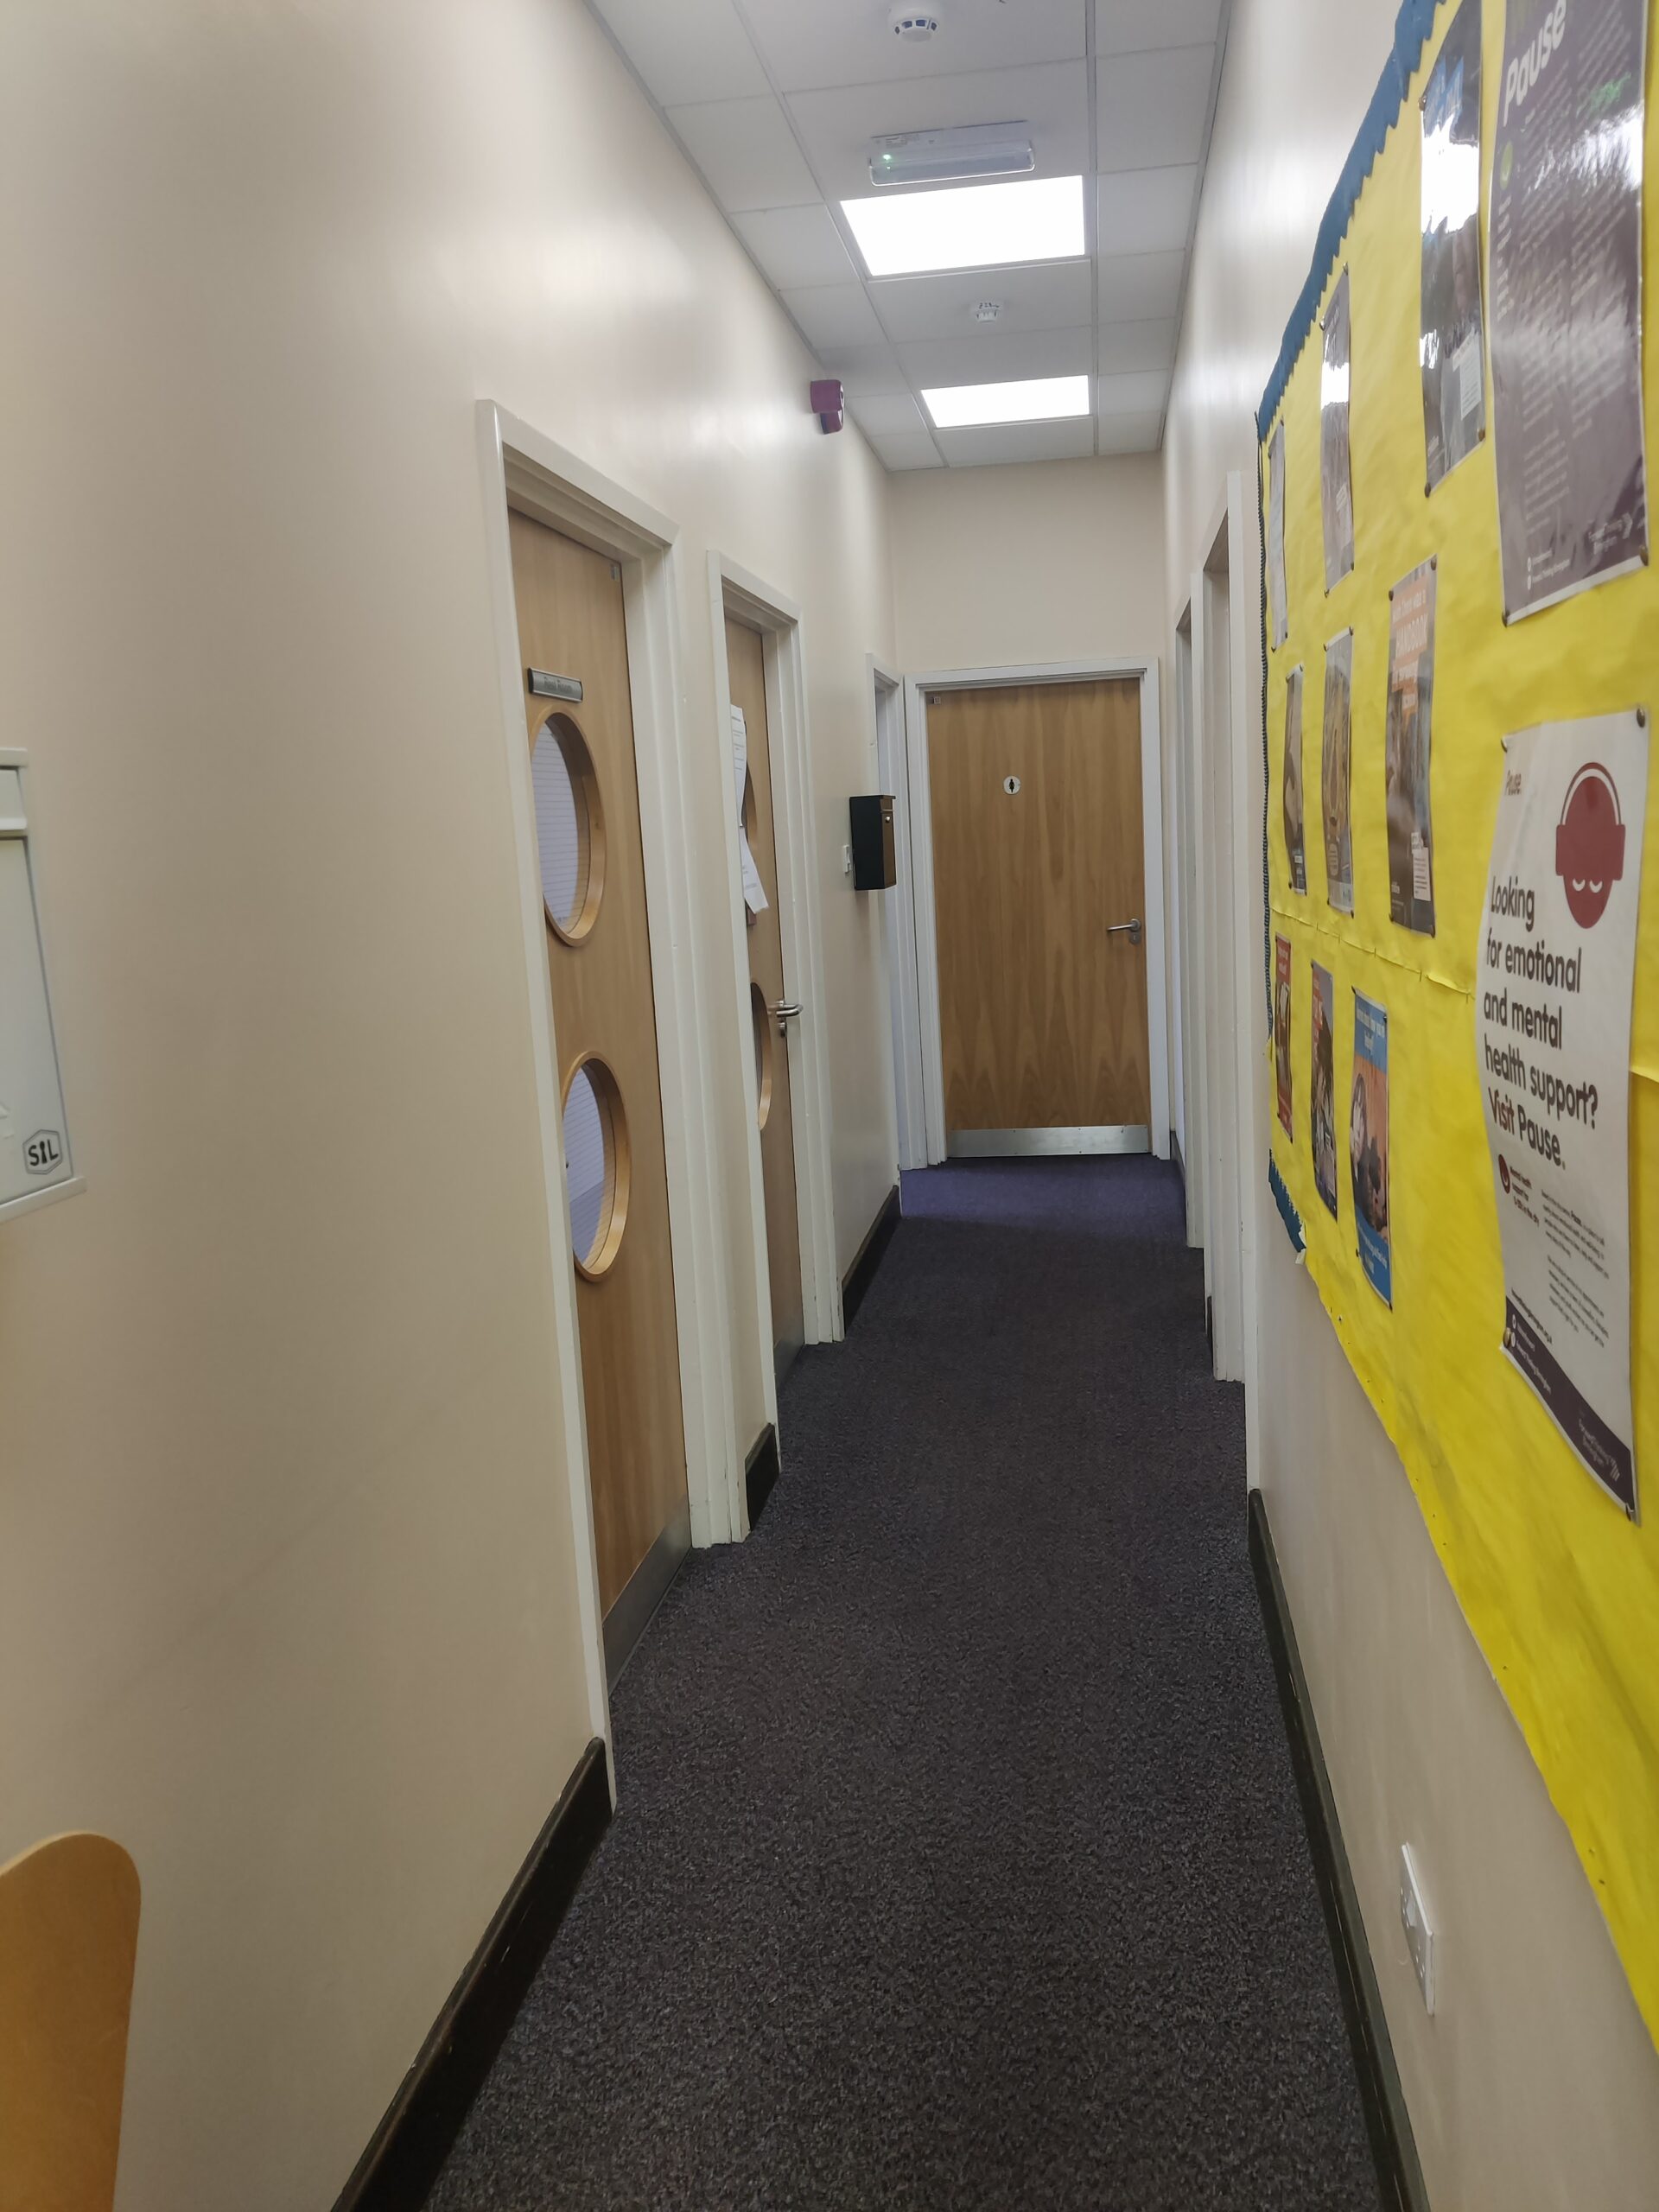 A hallway with posters and bulletin boards.